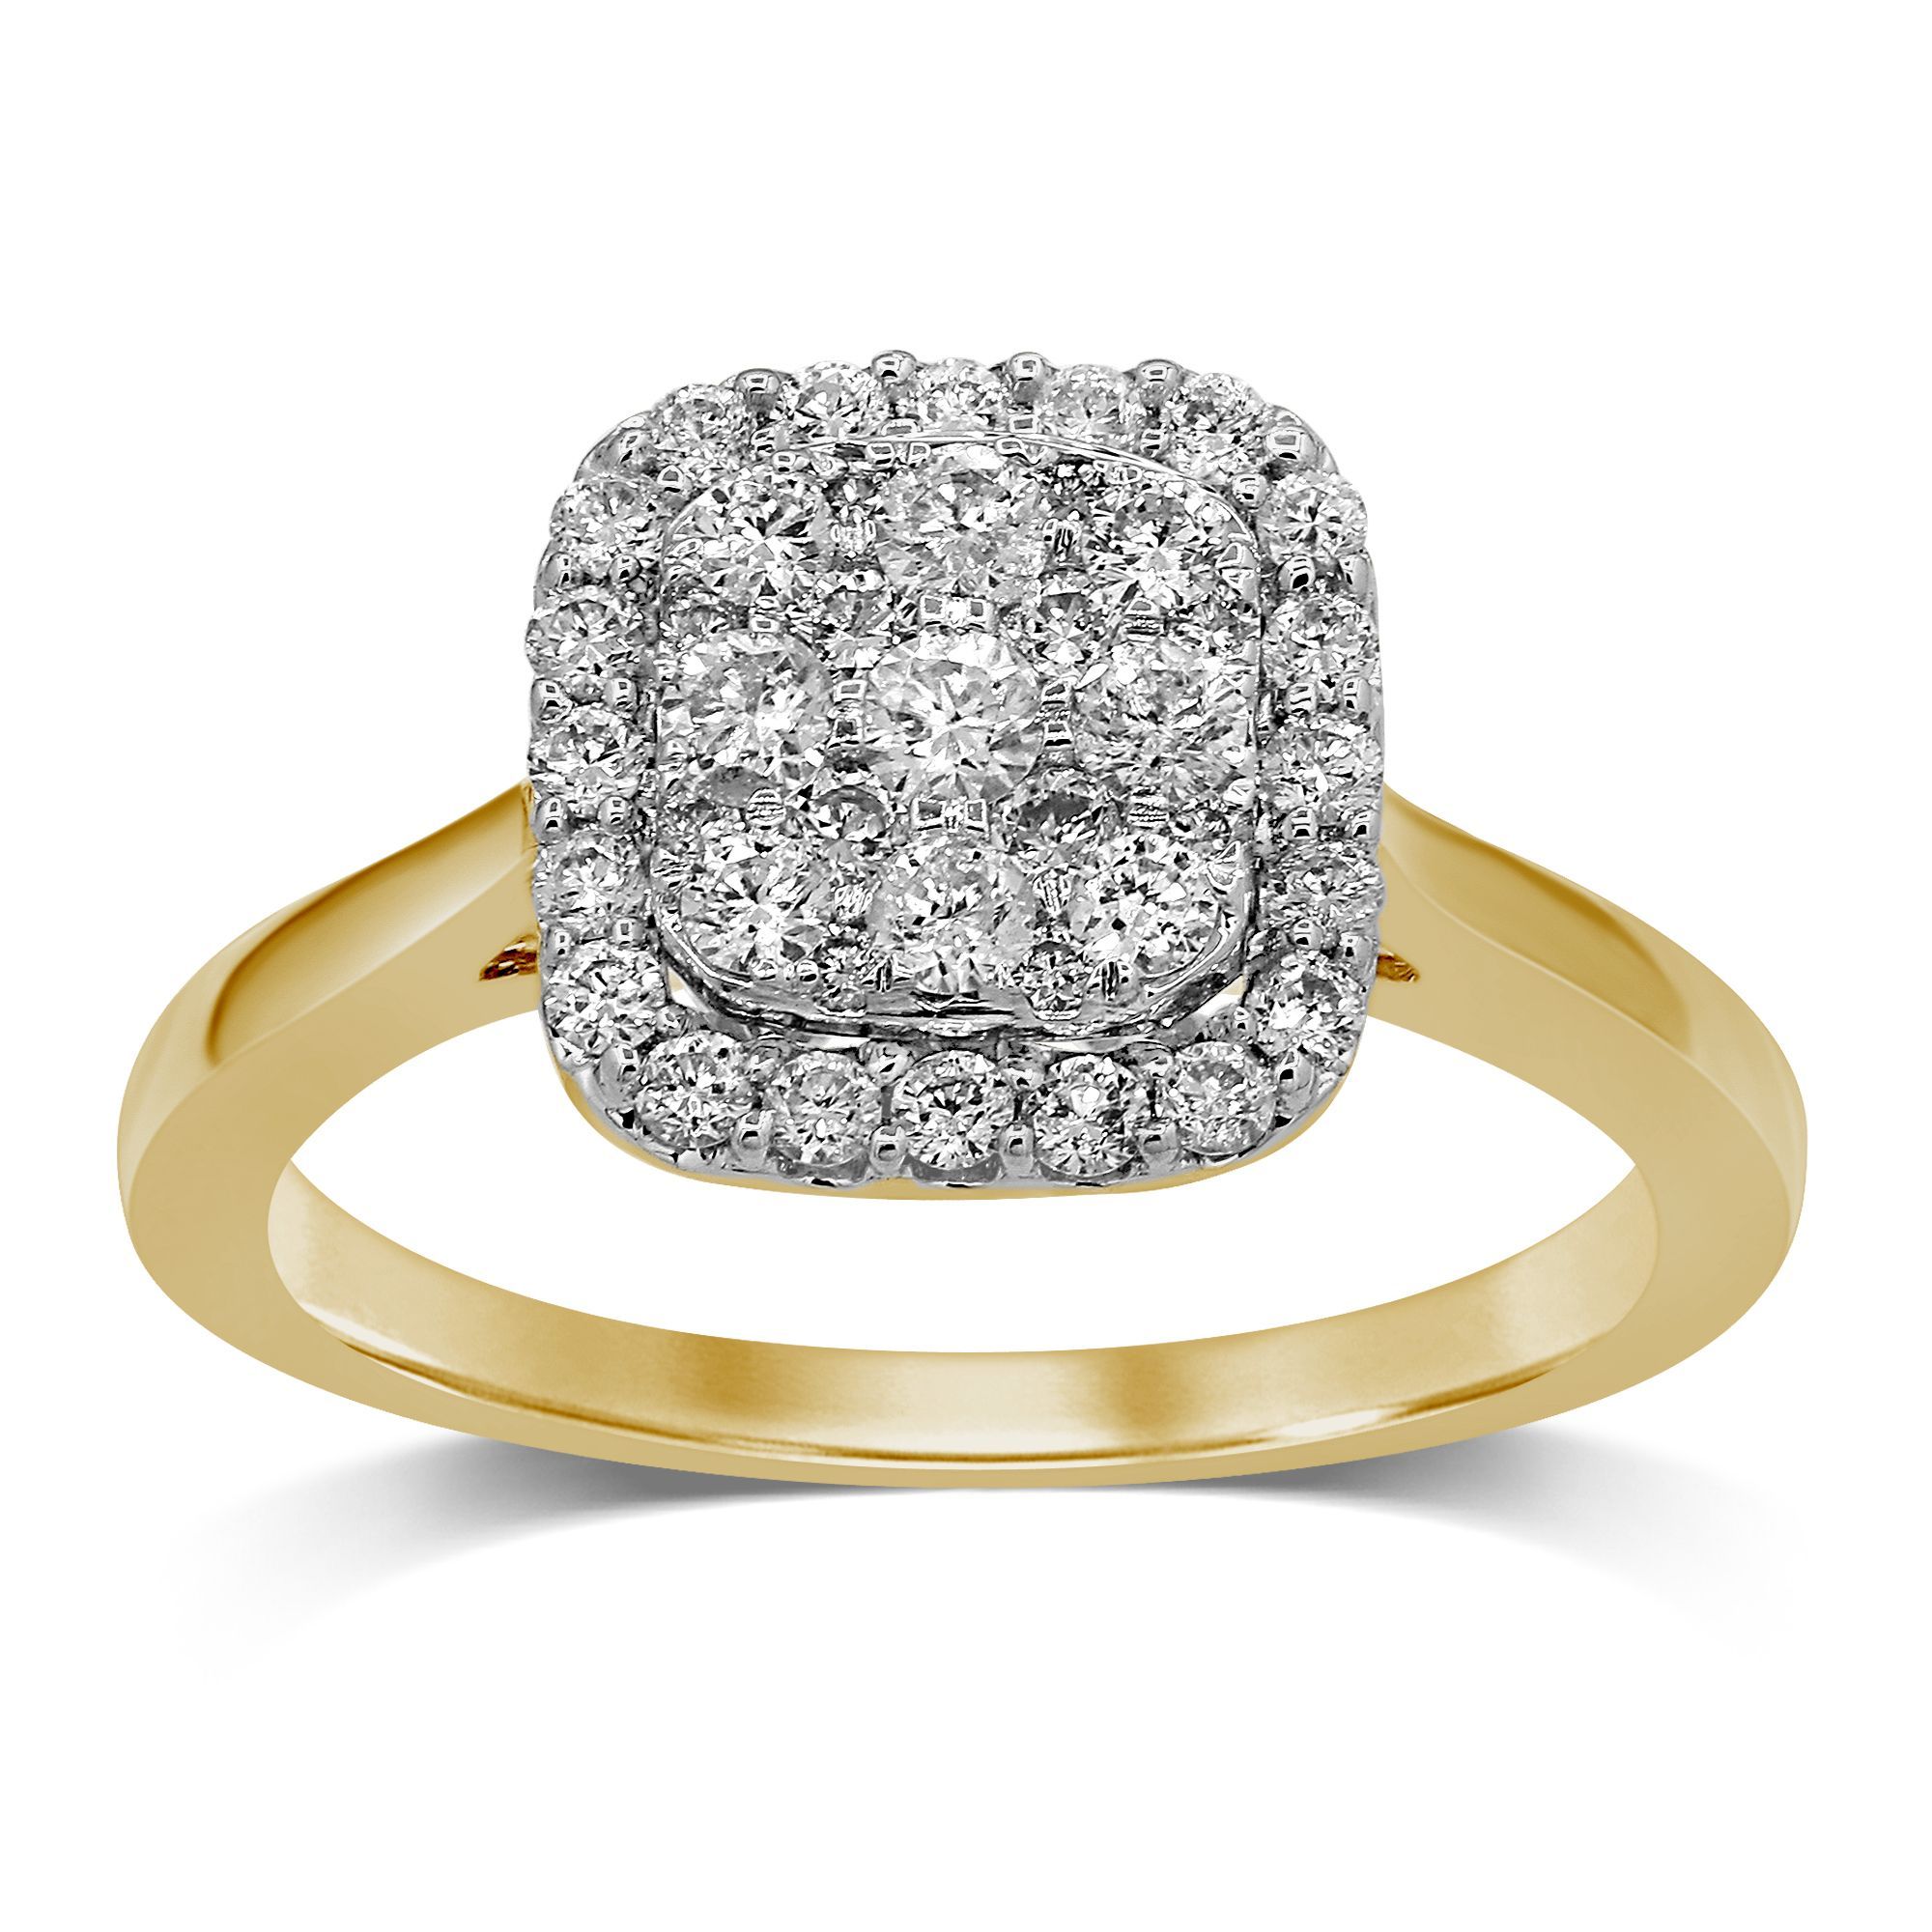 Brilliant Square Look Ring with 0.60ct of Diamonds in 9ct Yellow Gold Rings Bevilles 